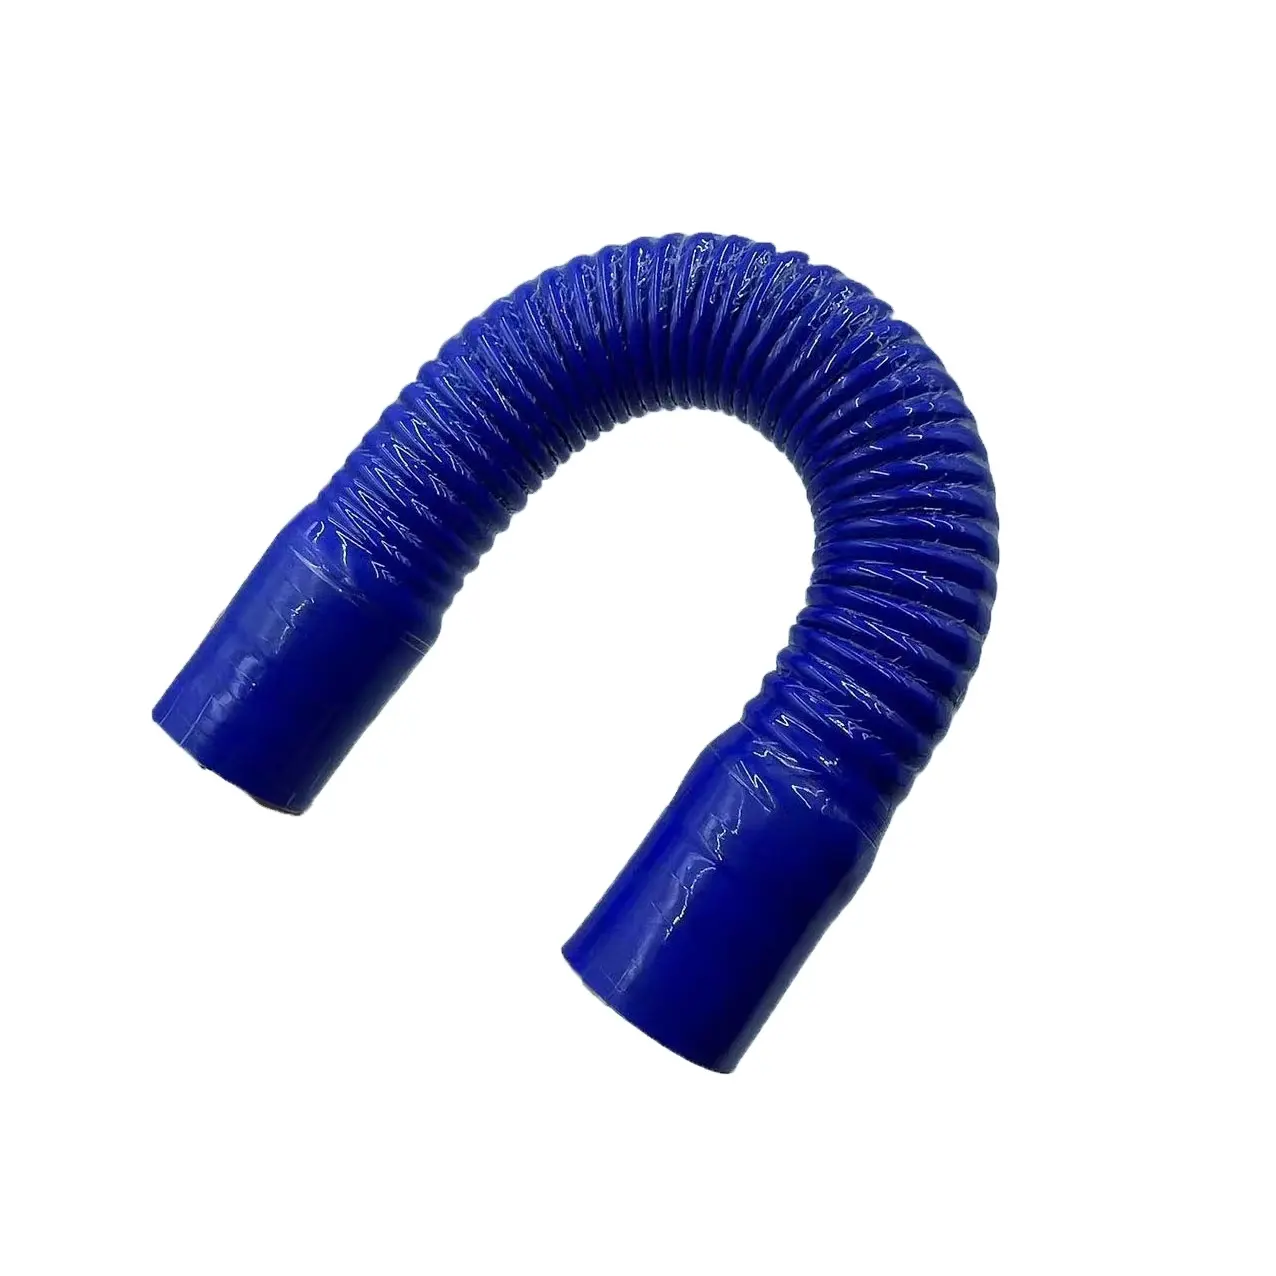 Customized high temperature resistant flexible corrugated silicone hose Steel Wire Reinforced Turbo Radiator Rubber Hose